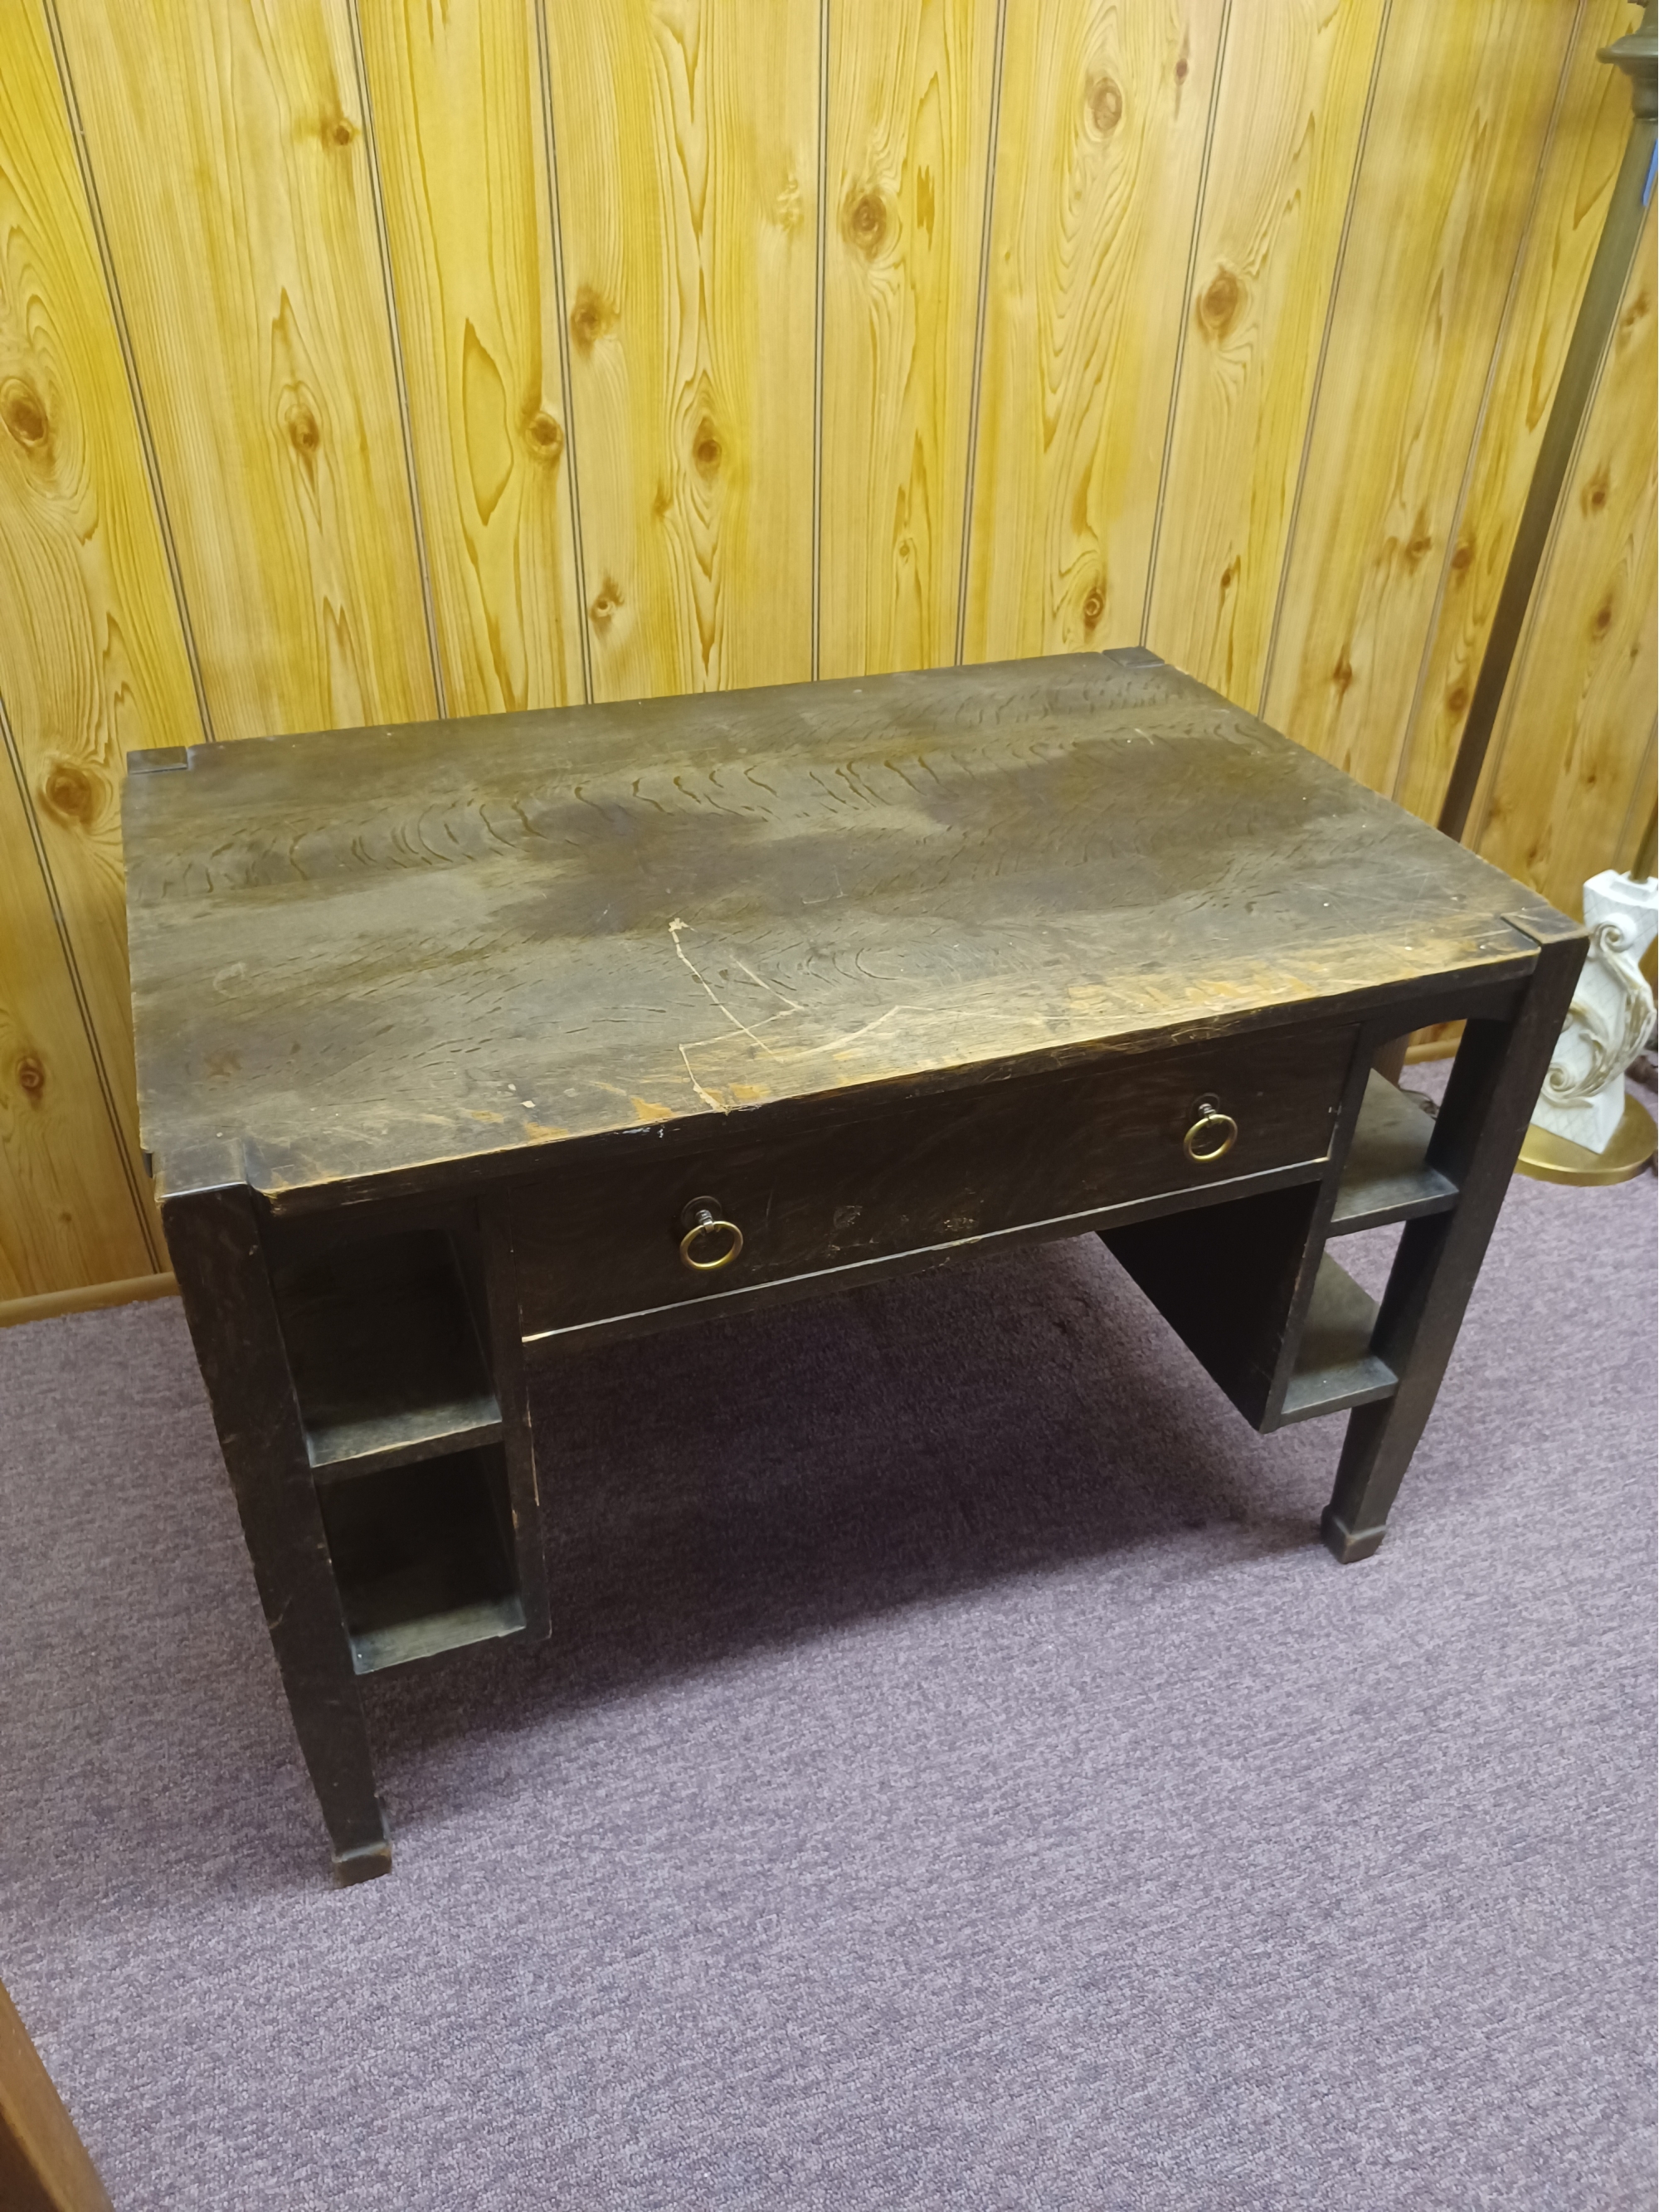 Antique Wood Heavy Duty Desk Table With Side Shelves And Drawer